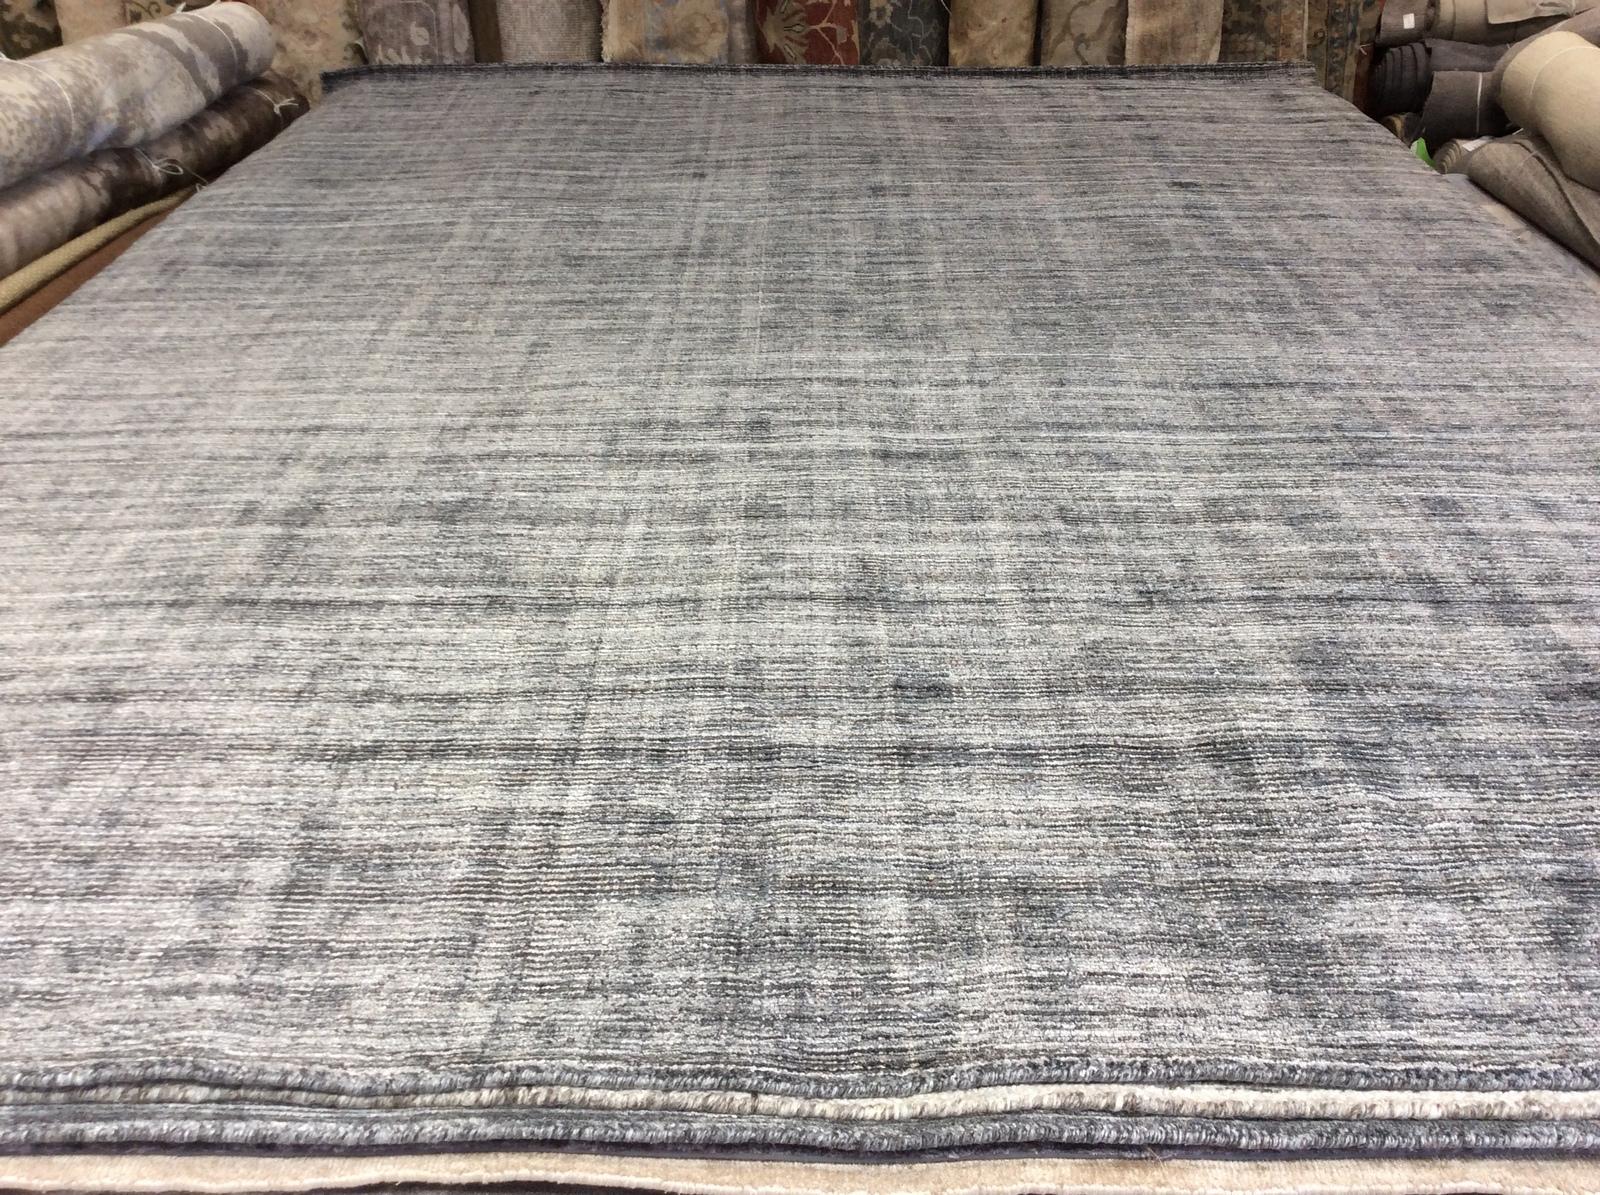 Trending in popularity again, the loop and cut style (combining looped with cut fibers) offers both texture and visual interest. Hand knotted wool. Best suited for areas of low to moderate traffic areas such as bedrooms or dens. Made in India.